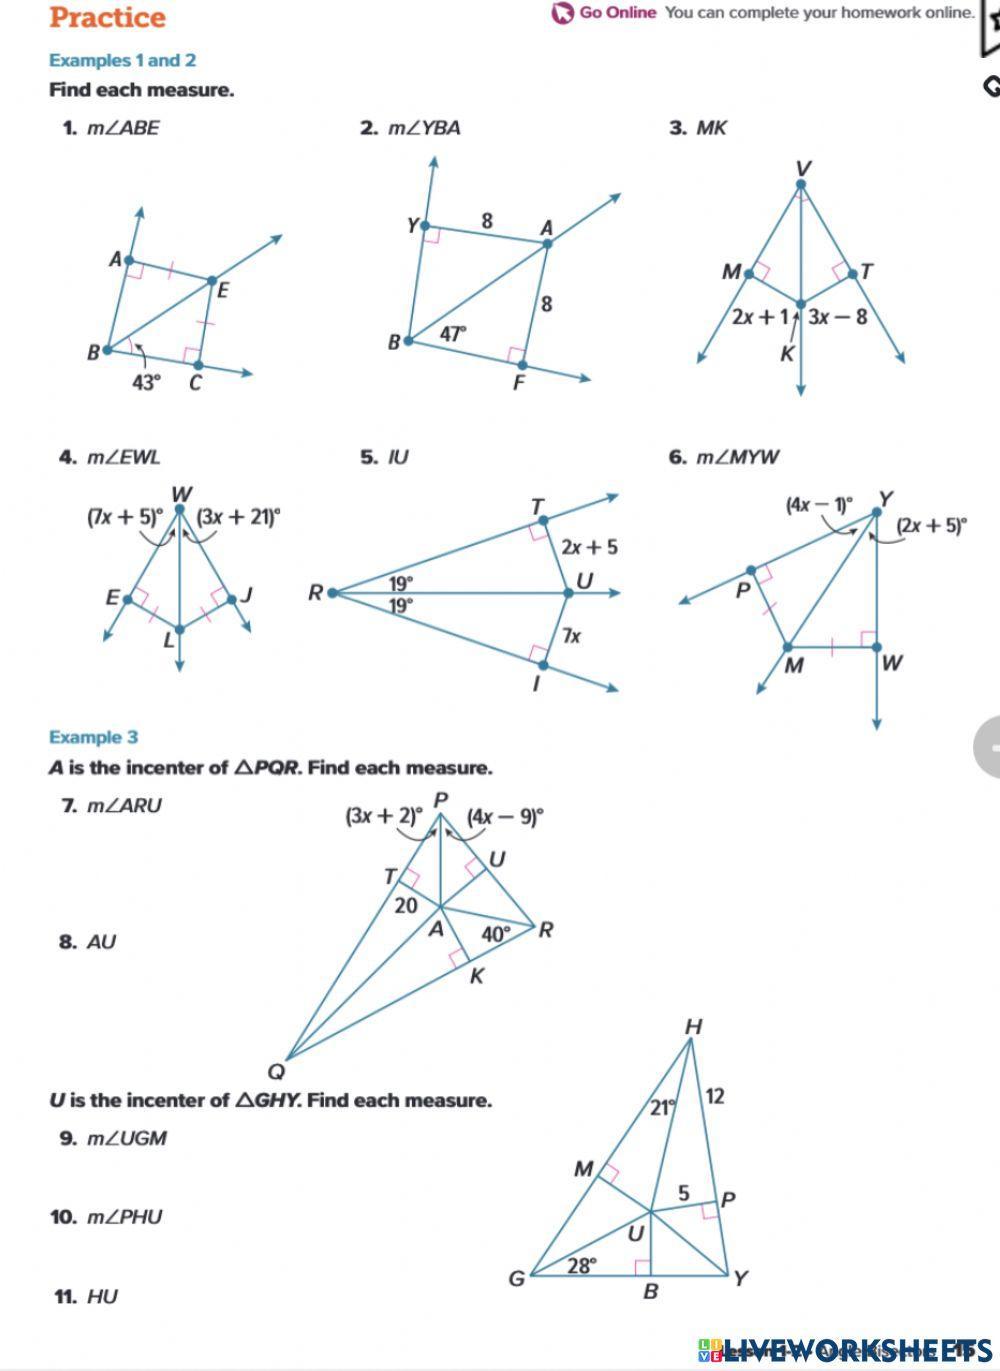 Angle bisectors of triangles